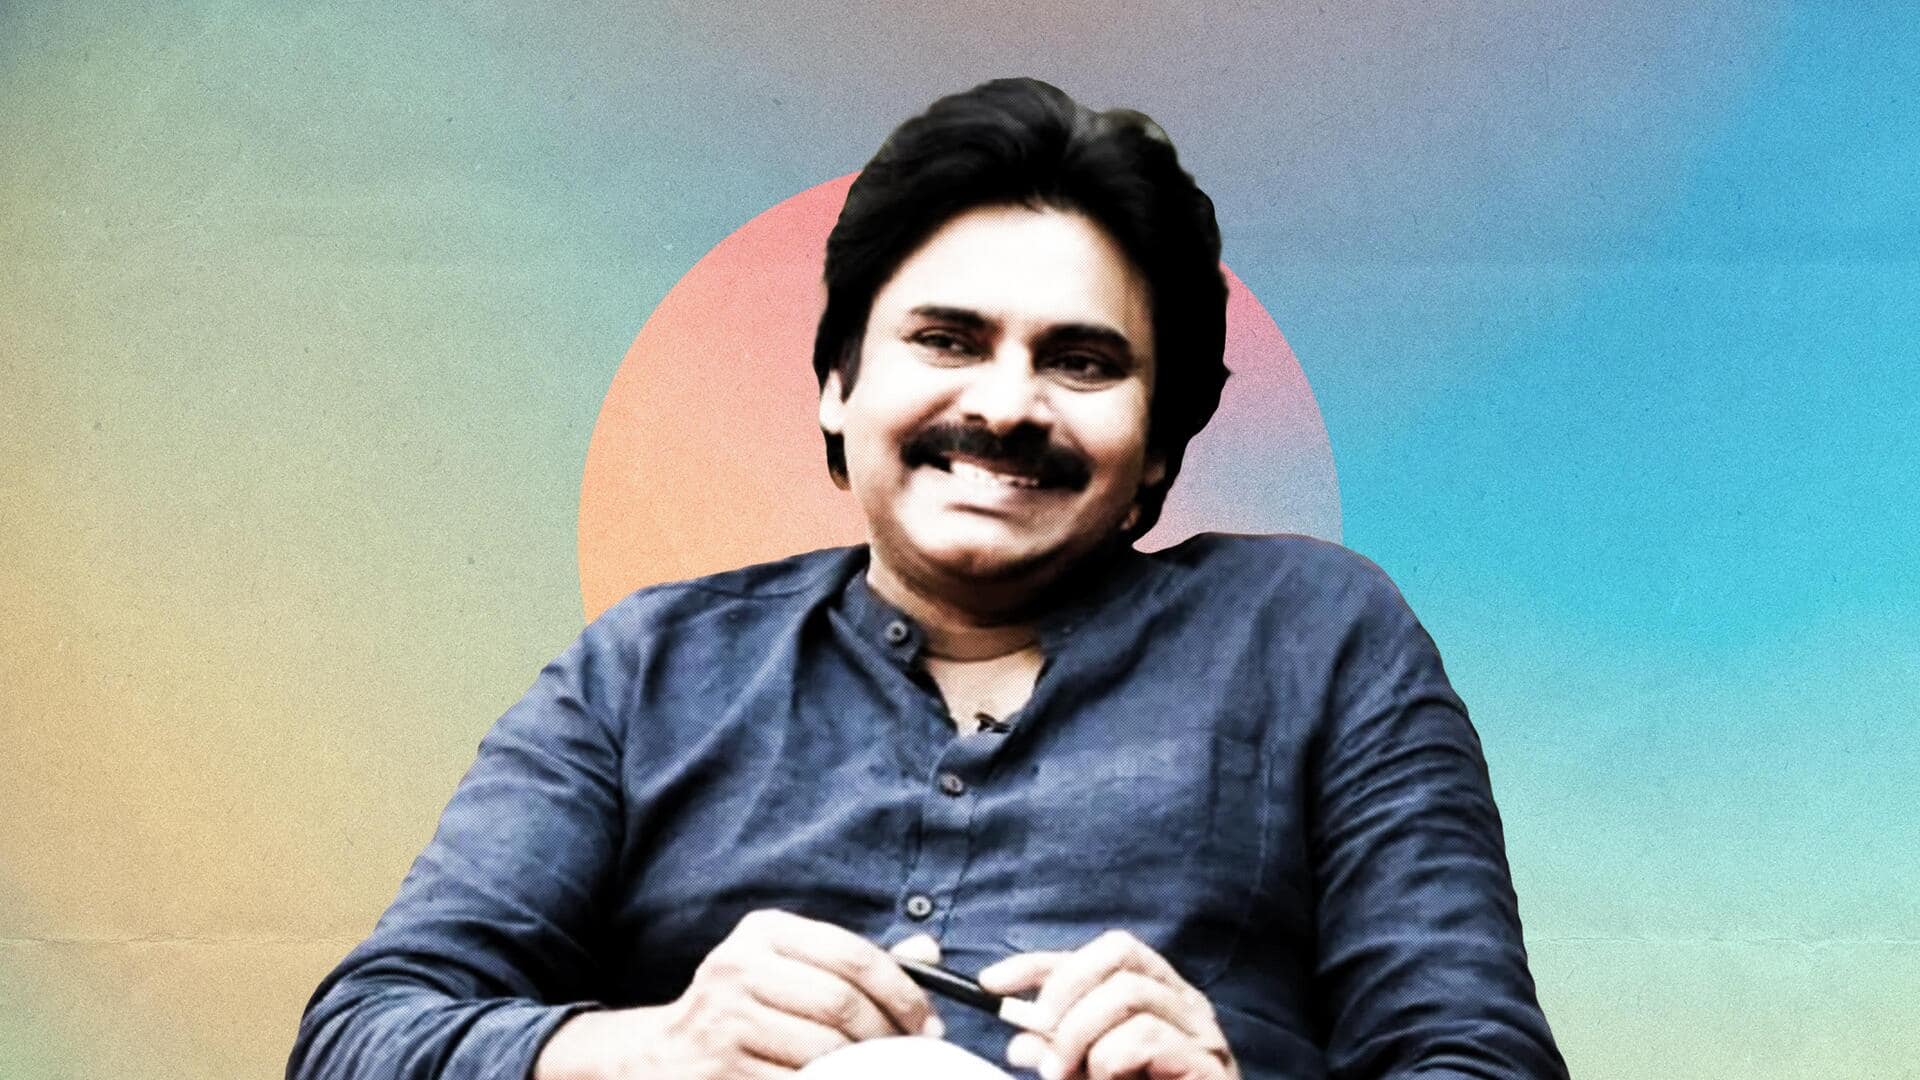 Pawan Kalyan's birthday: His most notable films over the years